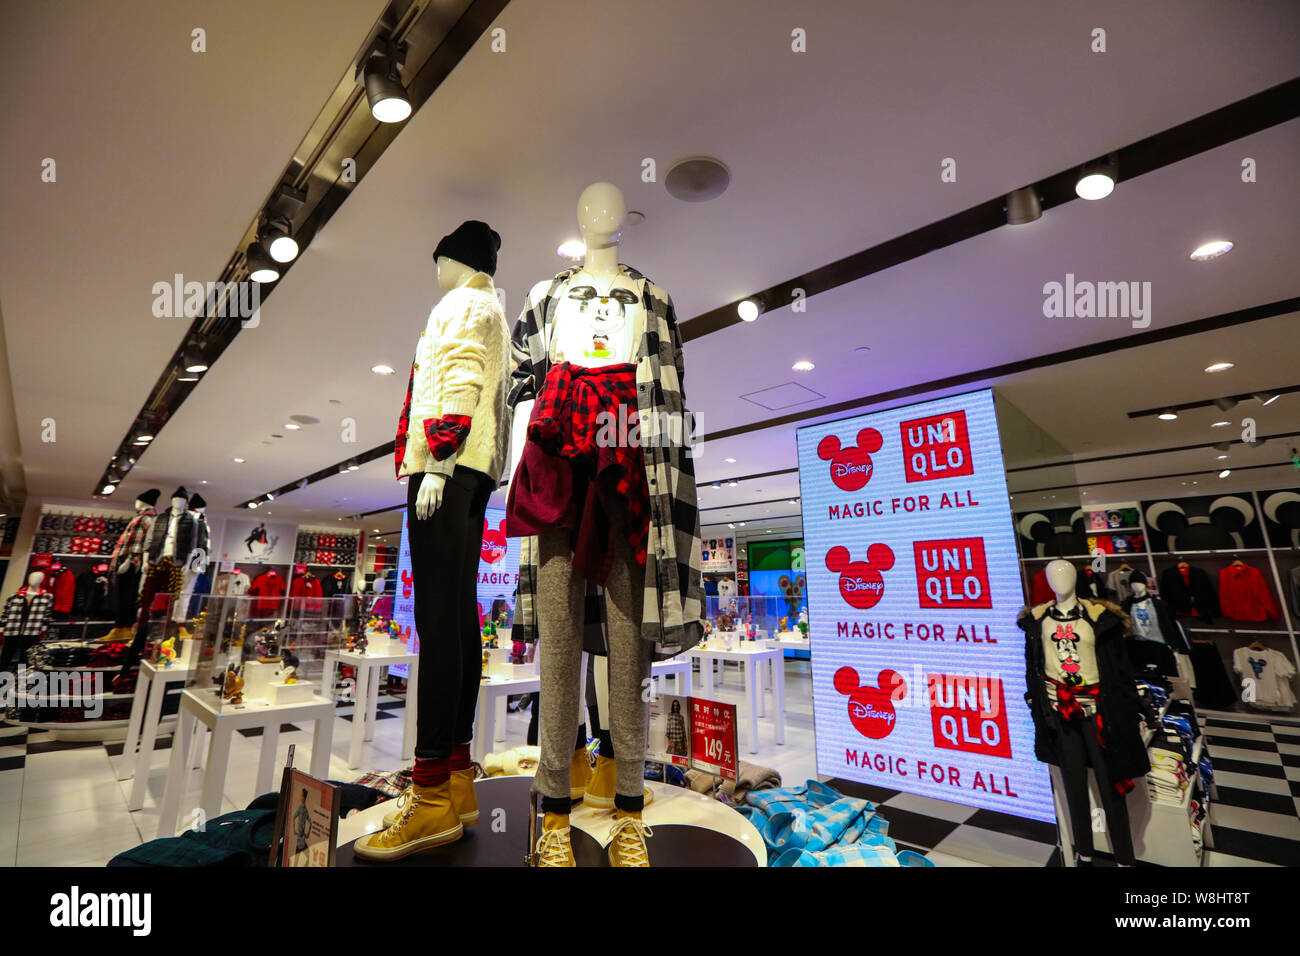 T Shirts And Jackets Of Magic For All Series Are For Sale At The Uniqlo S Disney Inspired Concept Store In Shanghai China 29 September 15 Uni Stock Photo Alamy